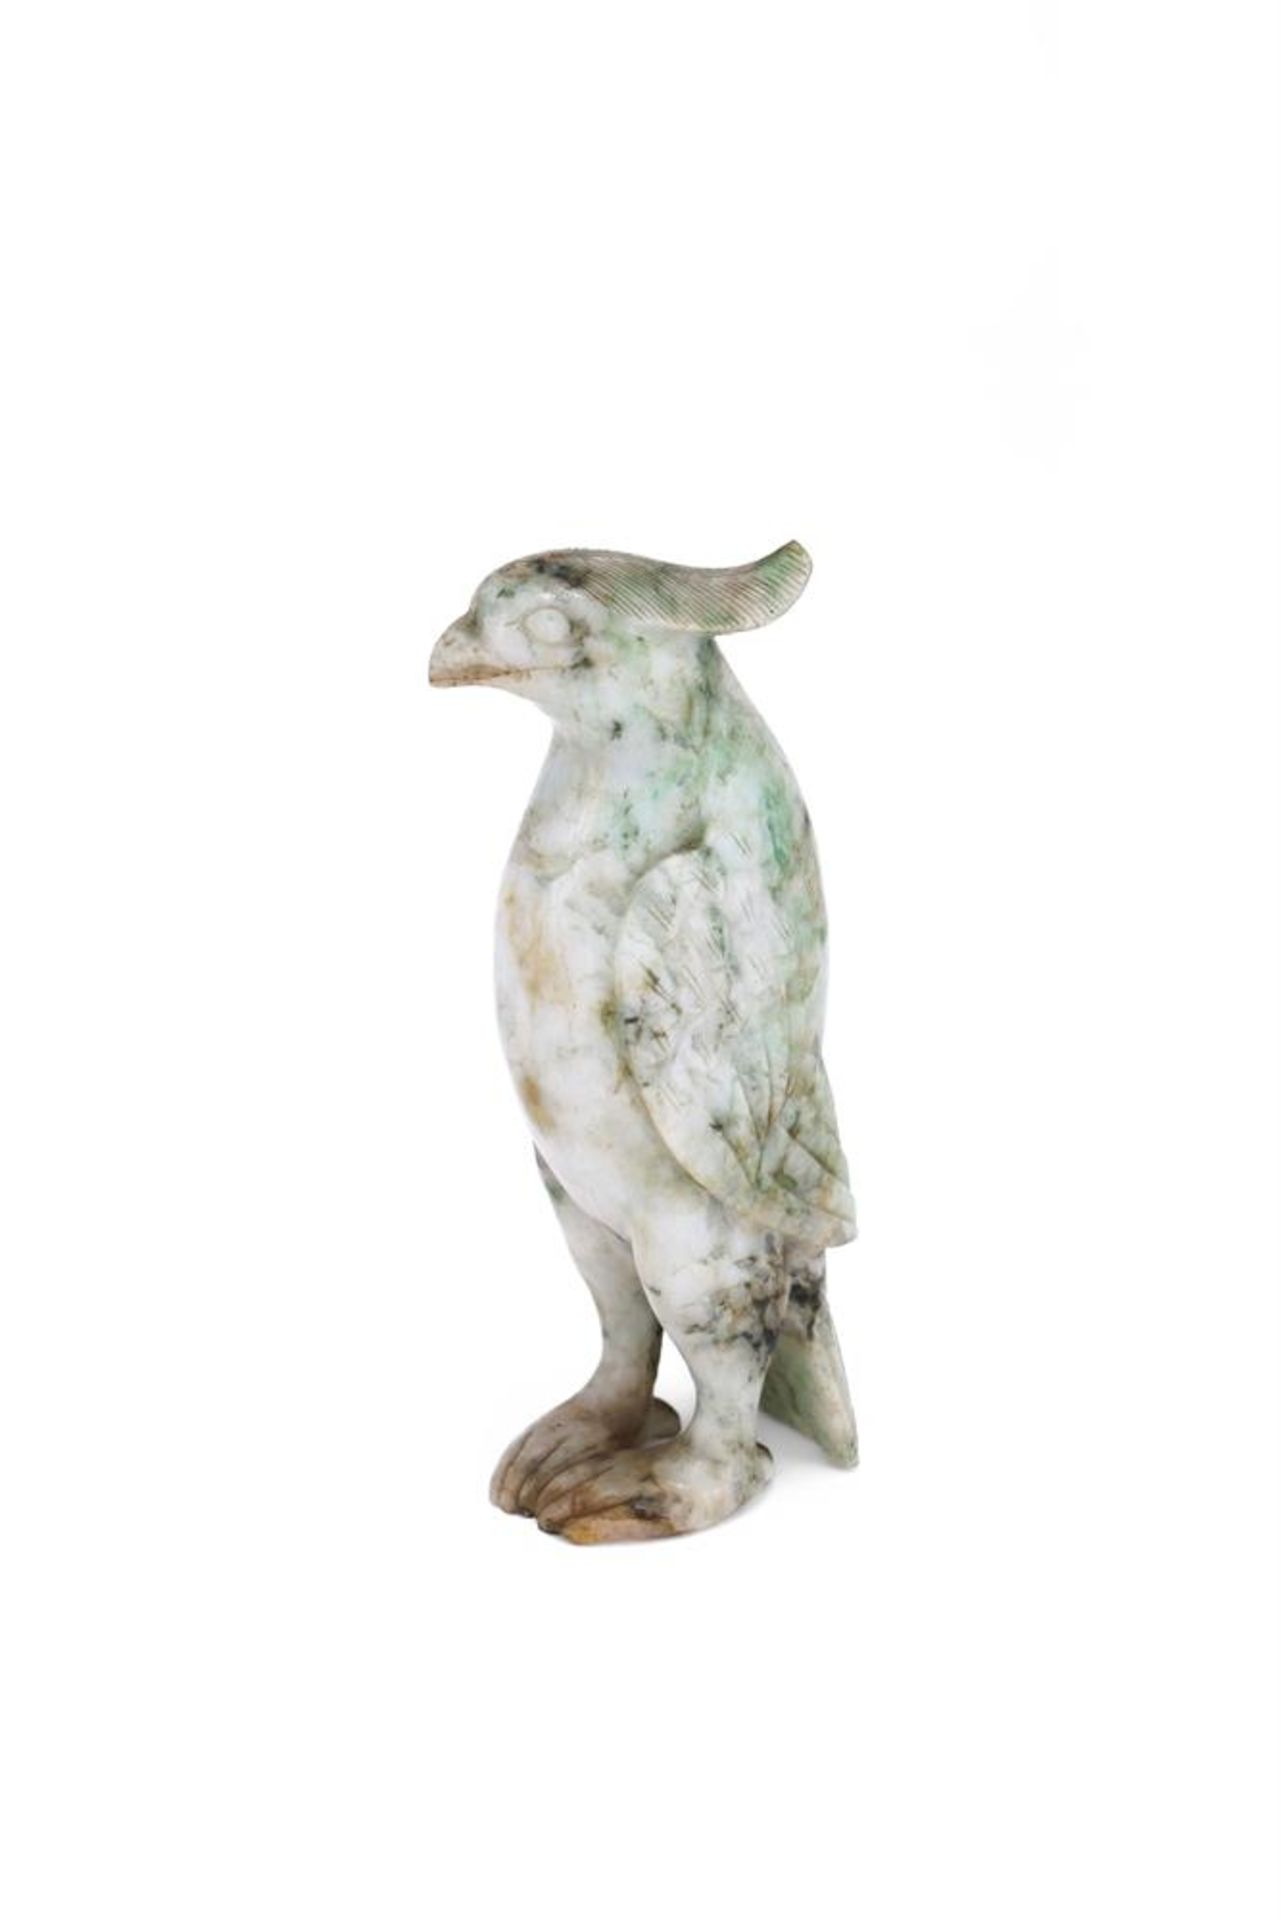 A Chinese Jadeite model of a parrot